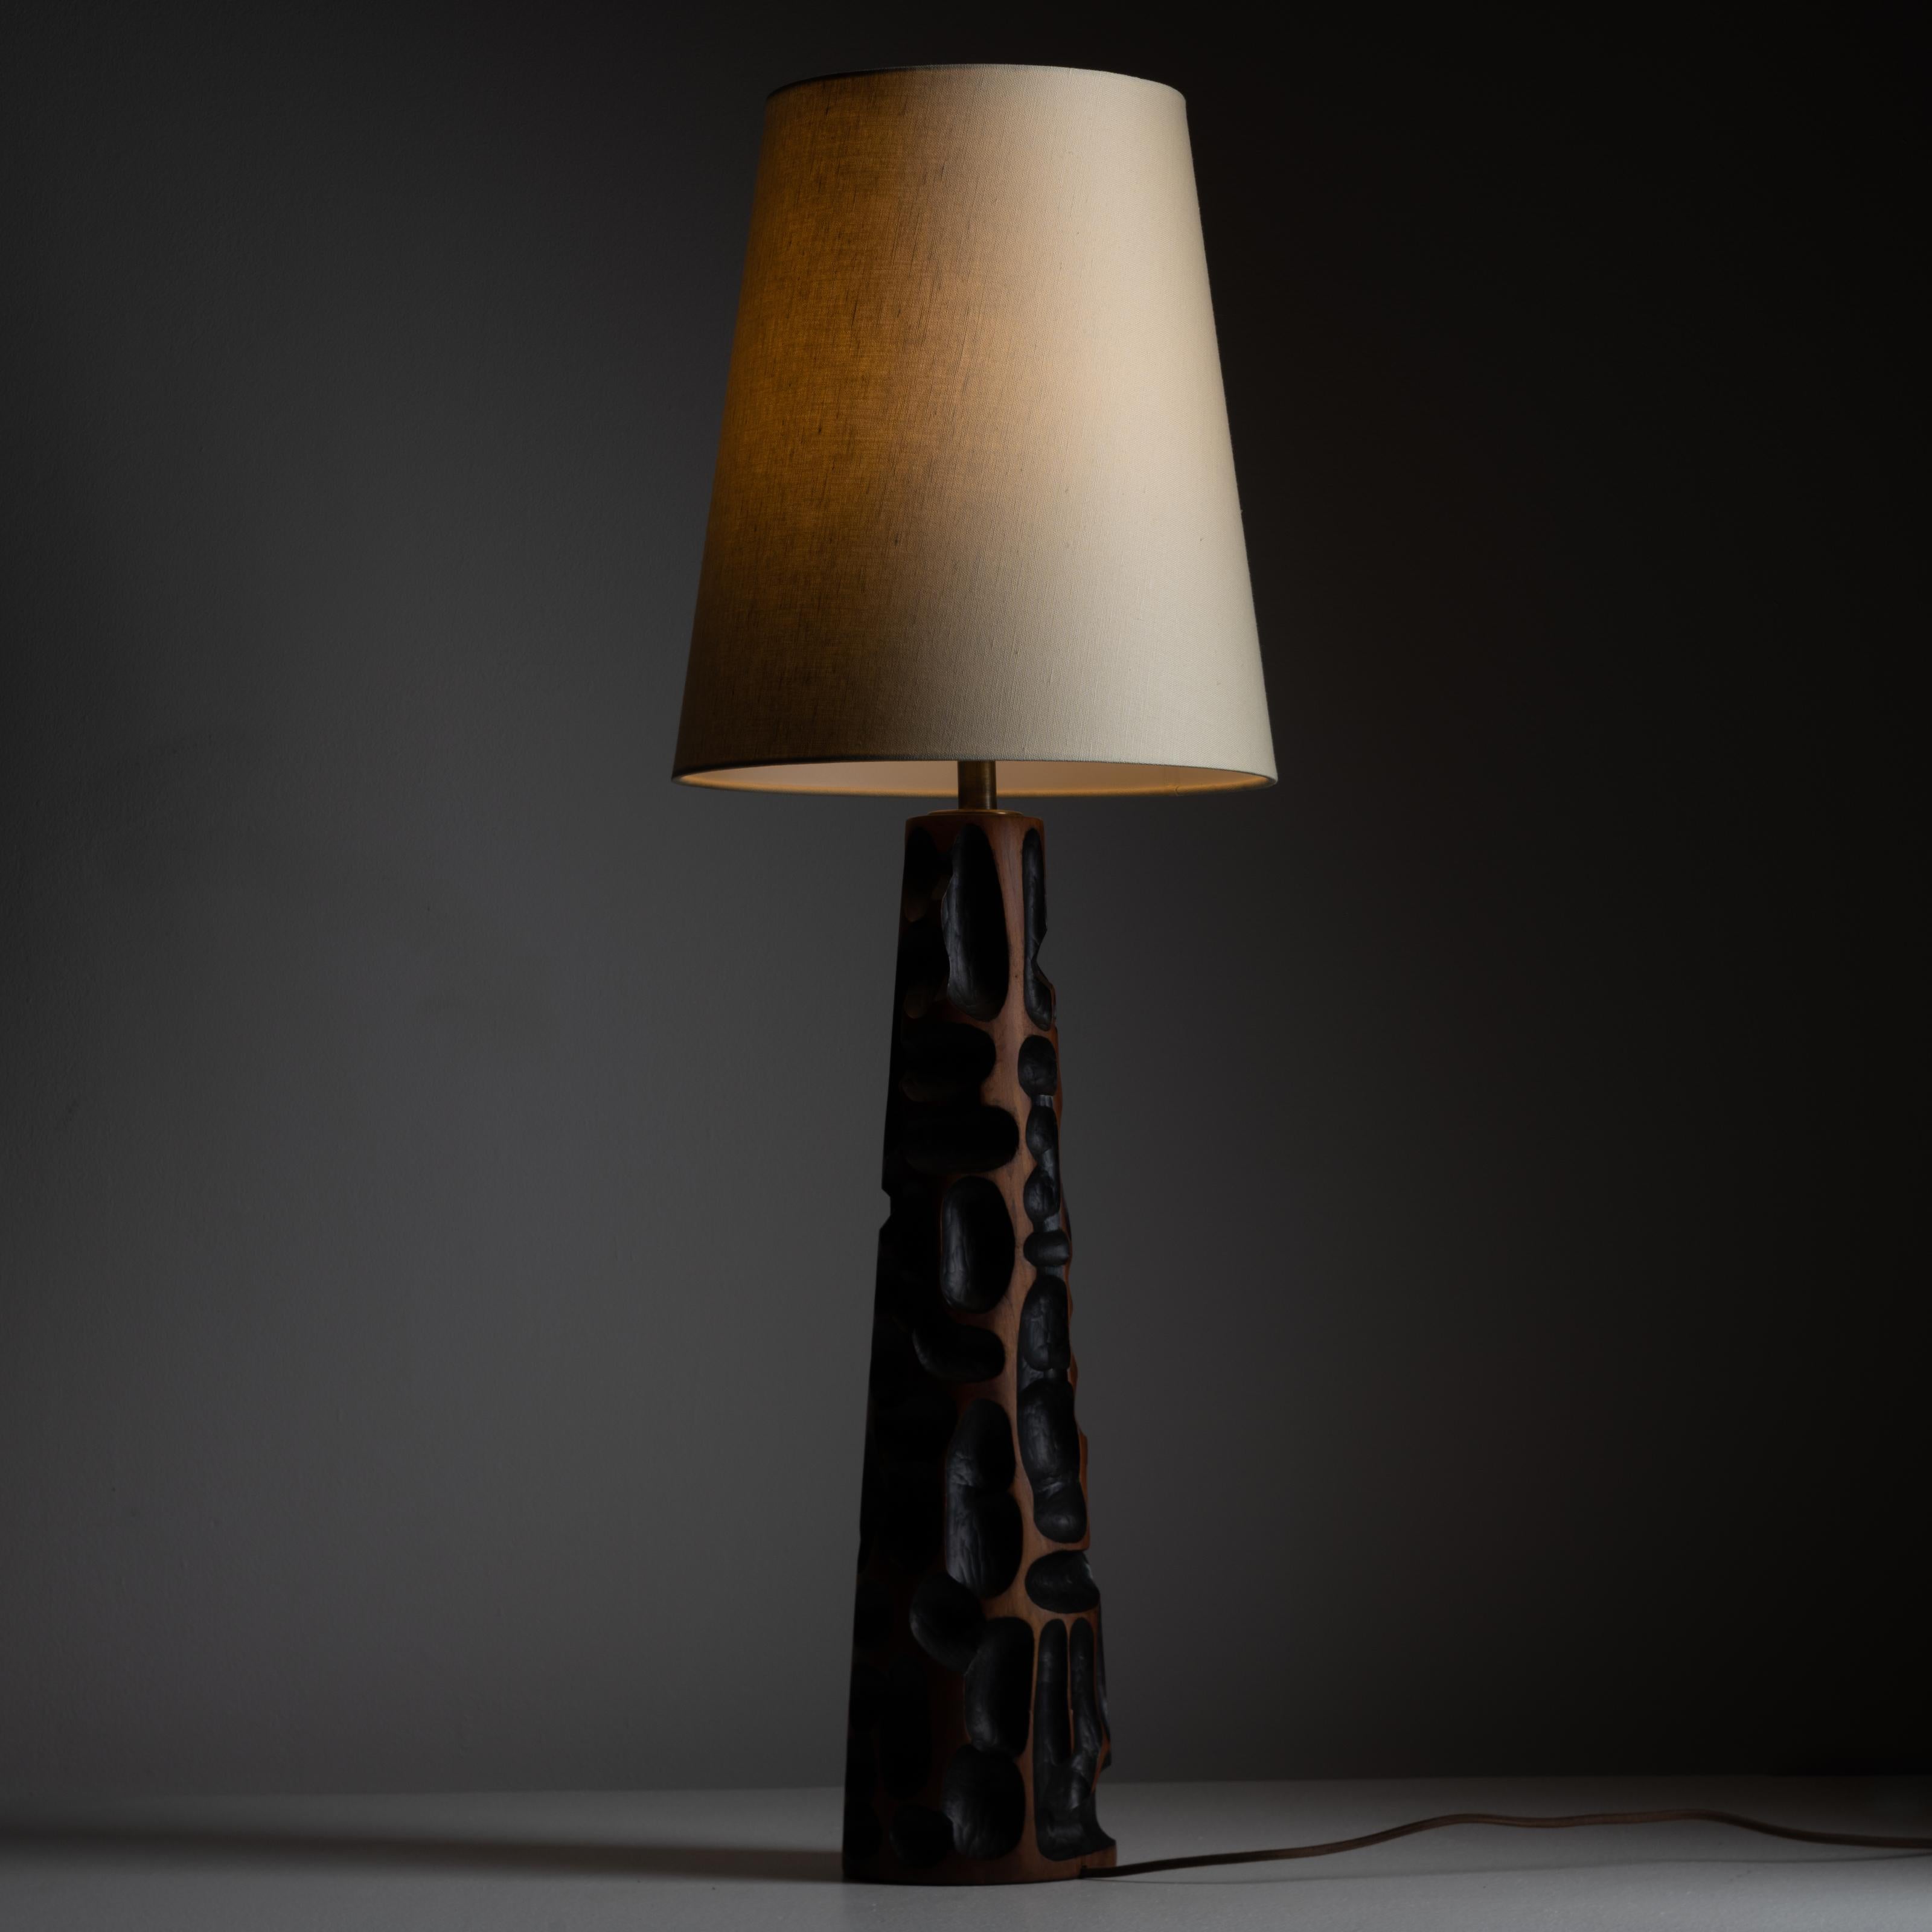 Hand carved wooden table lamp. Designed and manufactured in Italy, circa 1960. Unique hand carved wooden table lamp with blackened carving interiors. We recommend using an E27, 40w maximum bulb. Wired for US Standards. Bulb not included.